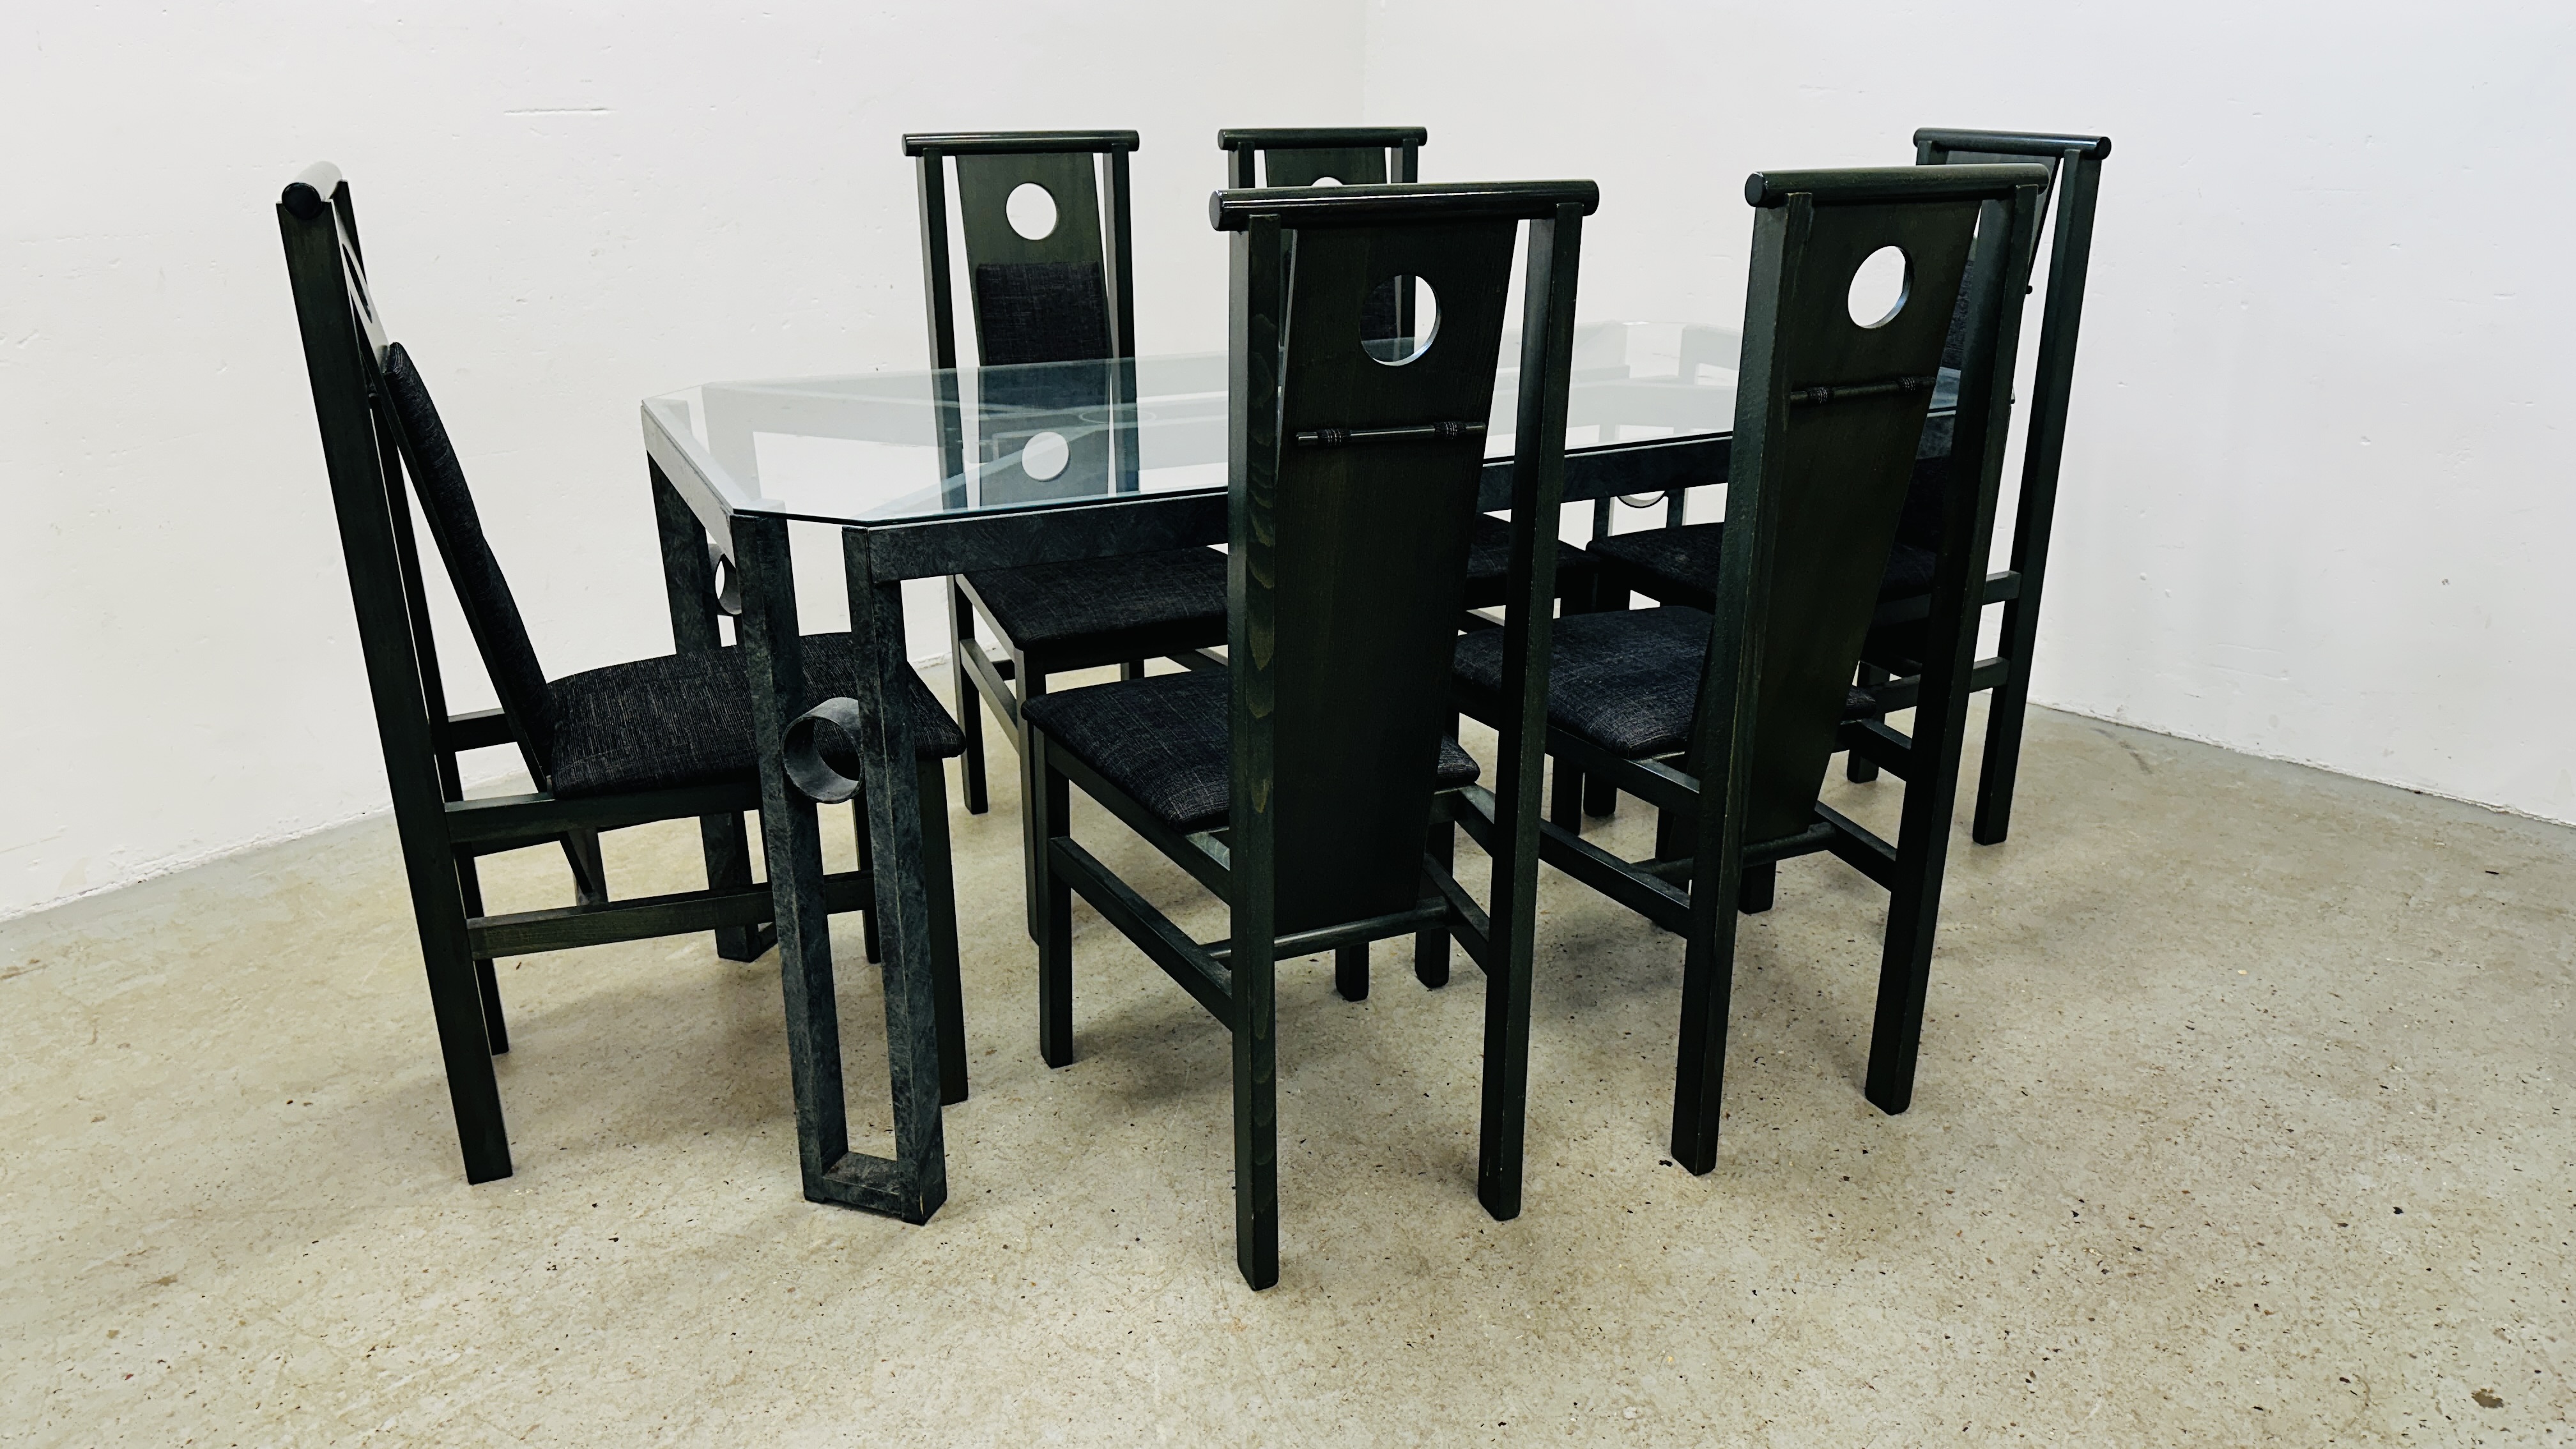 A DESIGNER MODERN METAL CRAFT DINING TABLE WITH GLASS TOP 155CM X 80CM ACCOMPANIED BY A SET OF SIX